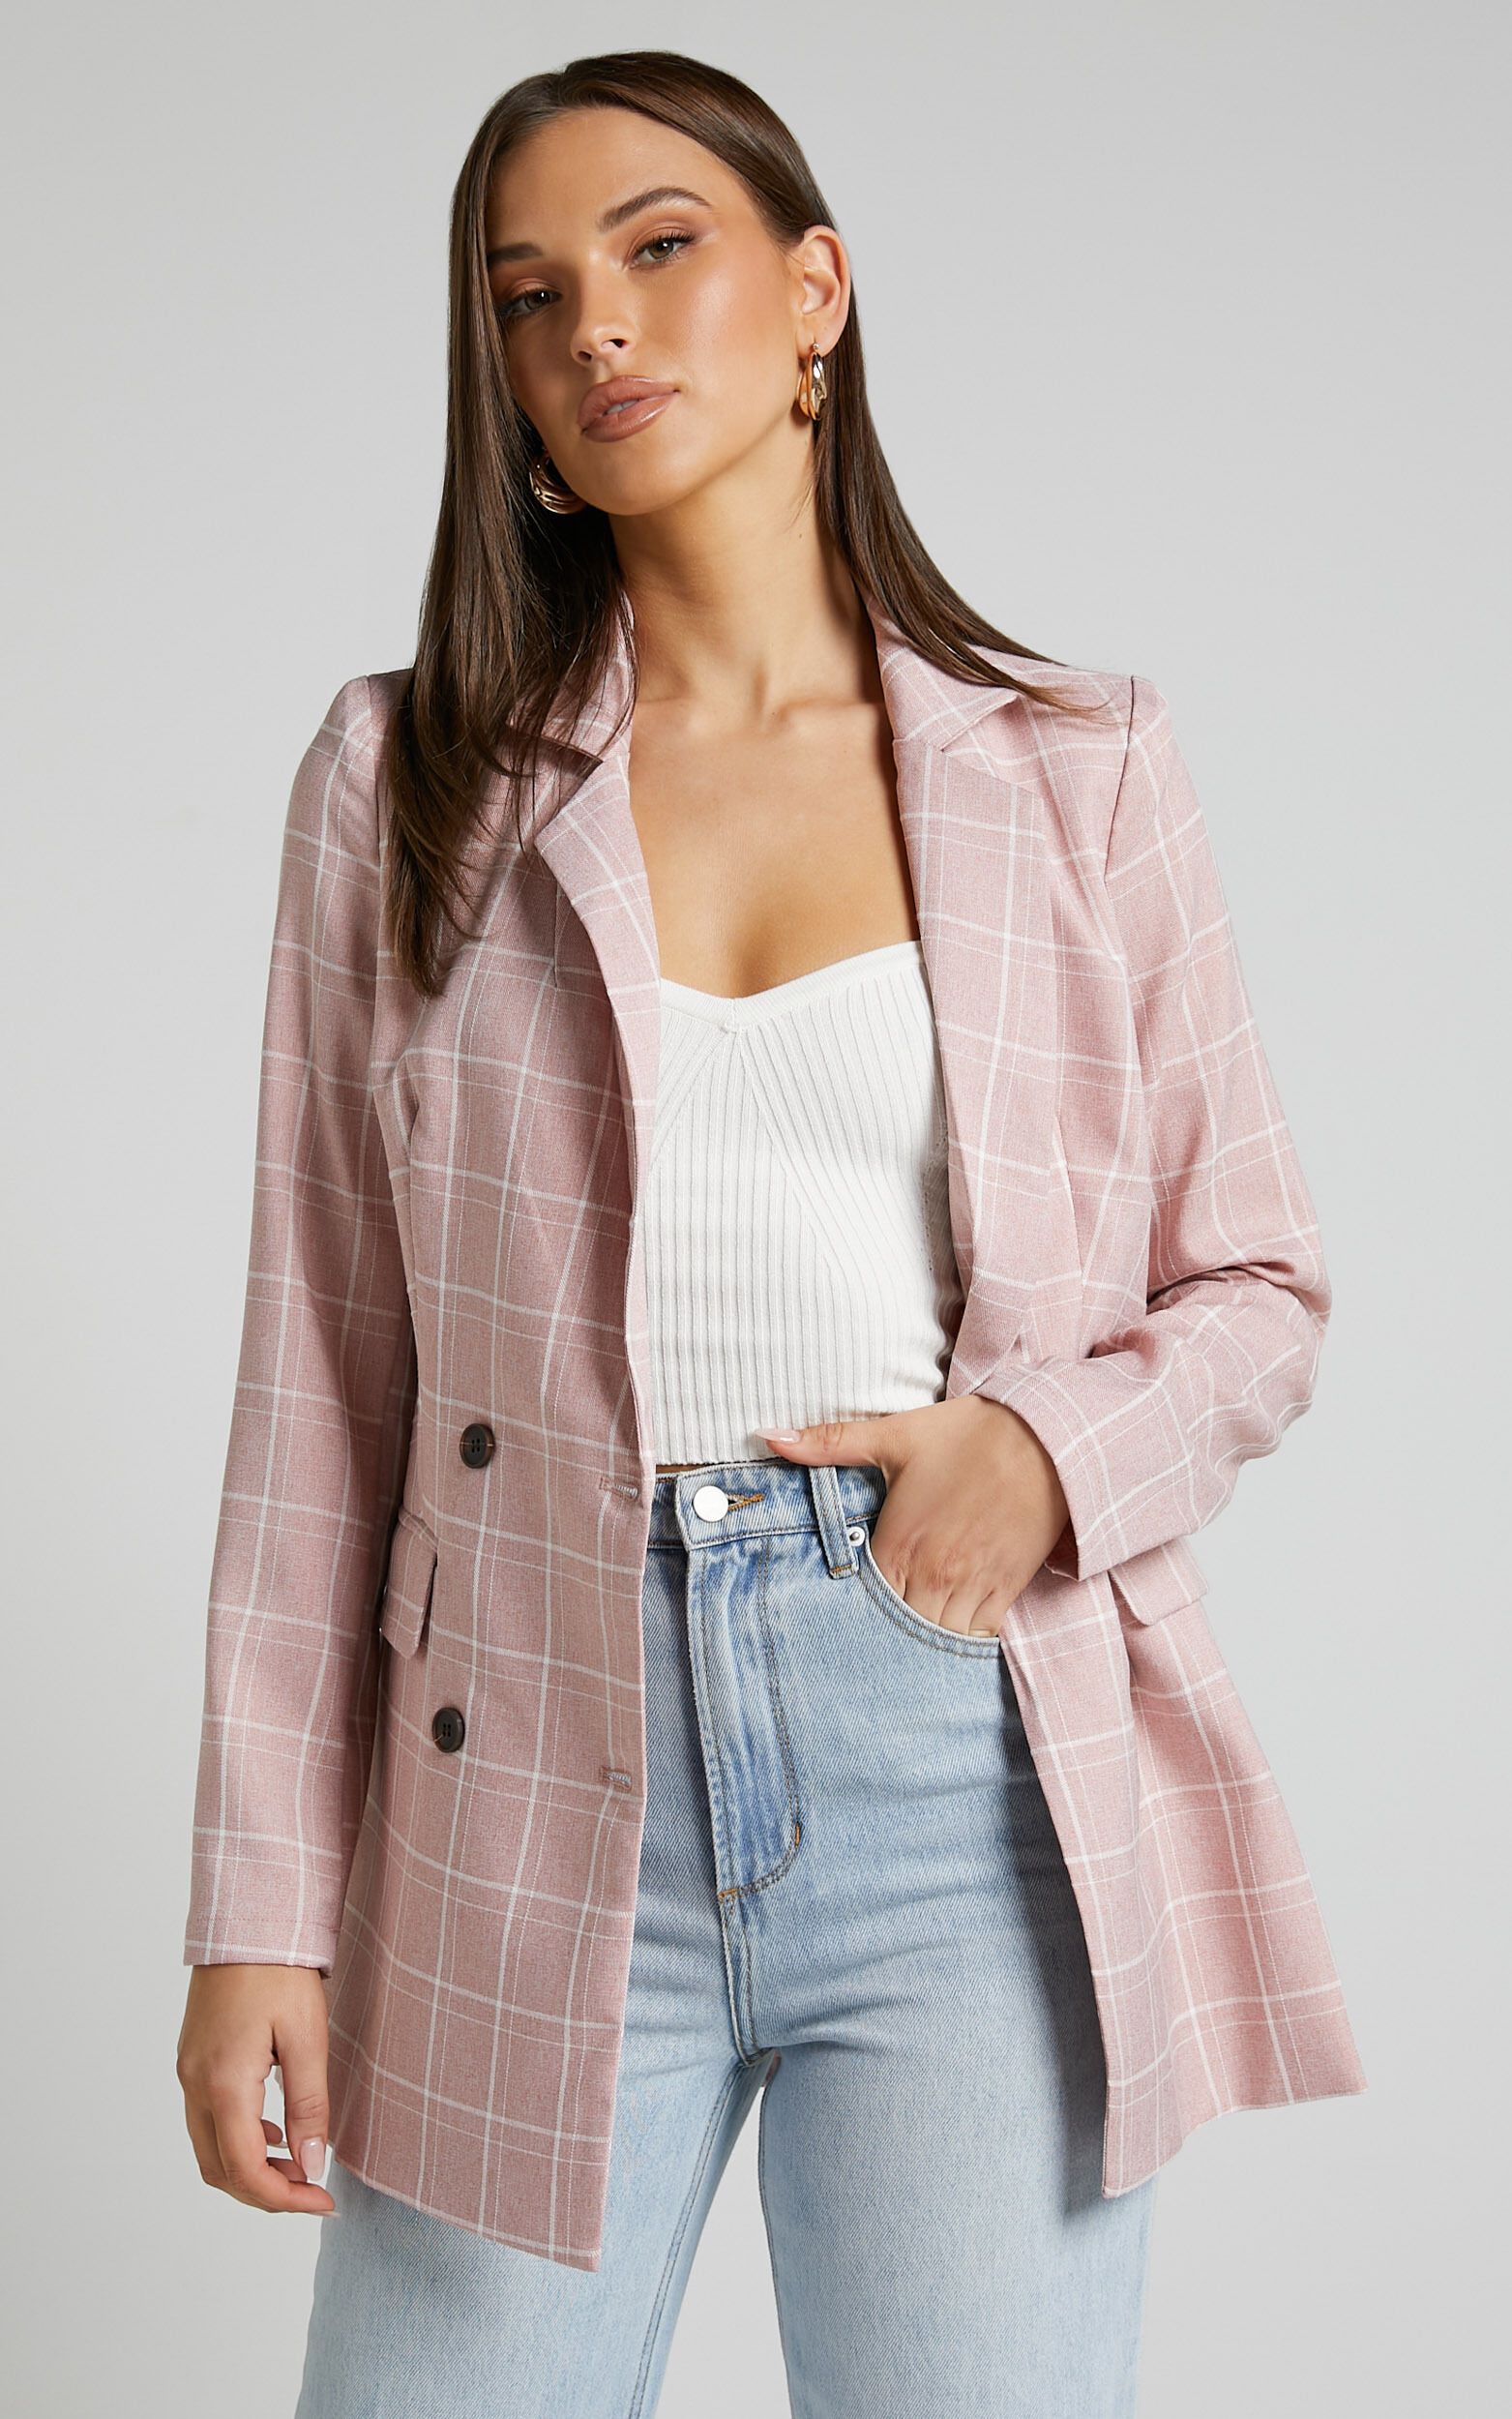 Sort It Out Blazer - Double Breasted Blazer in Blush Check | Showpo (US, UK & Europe)